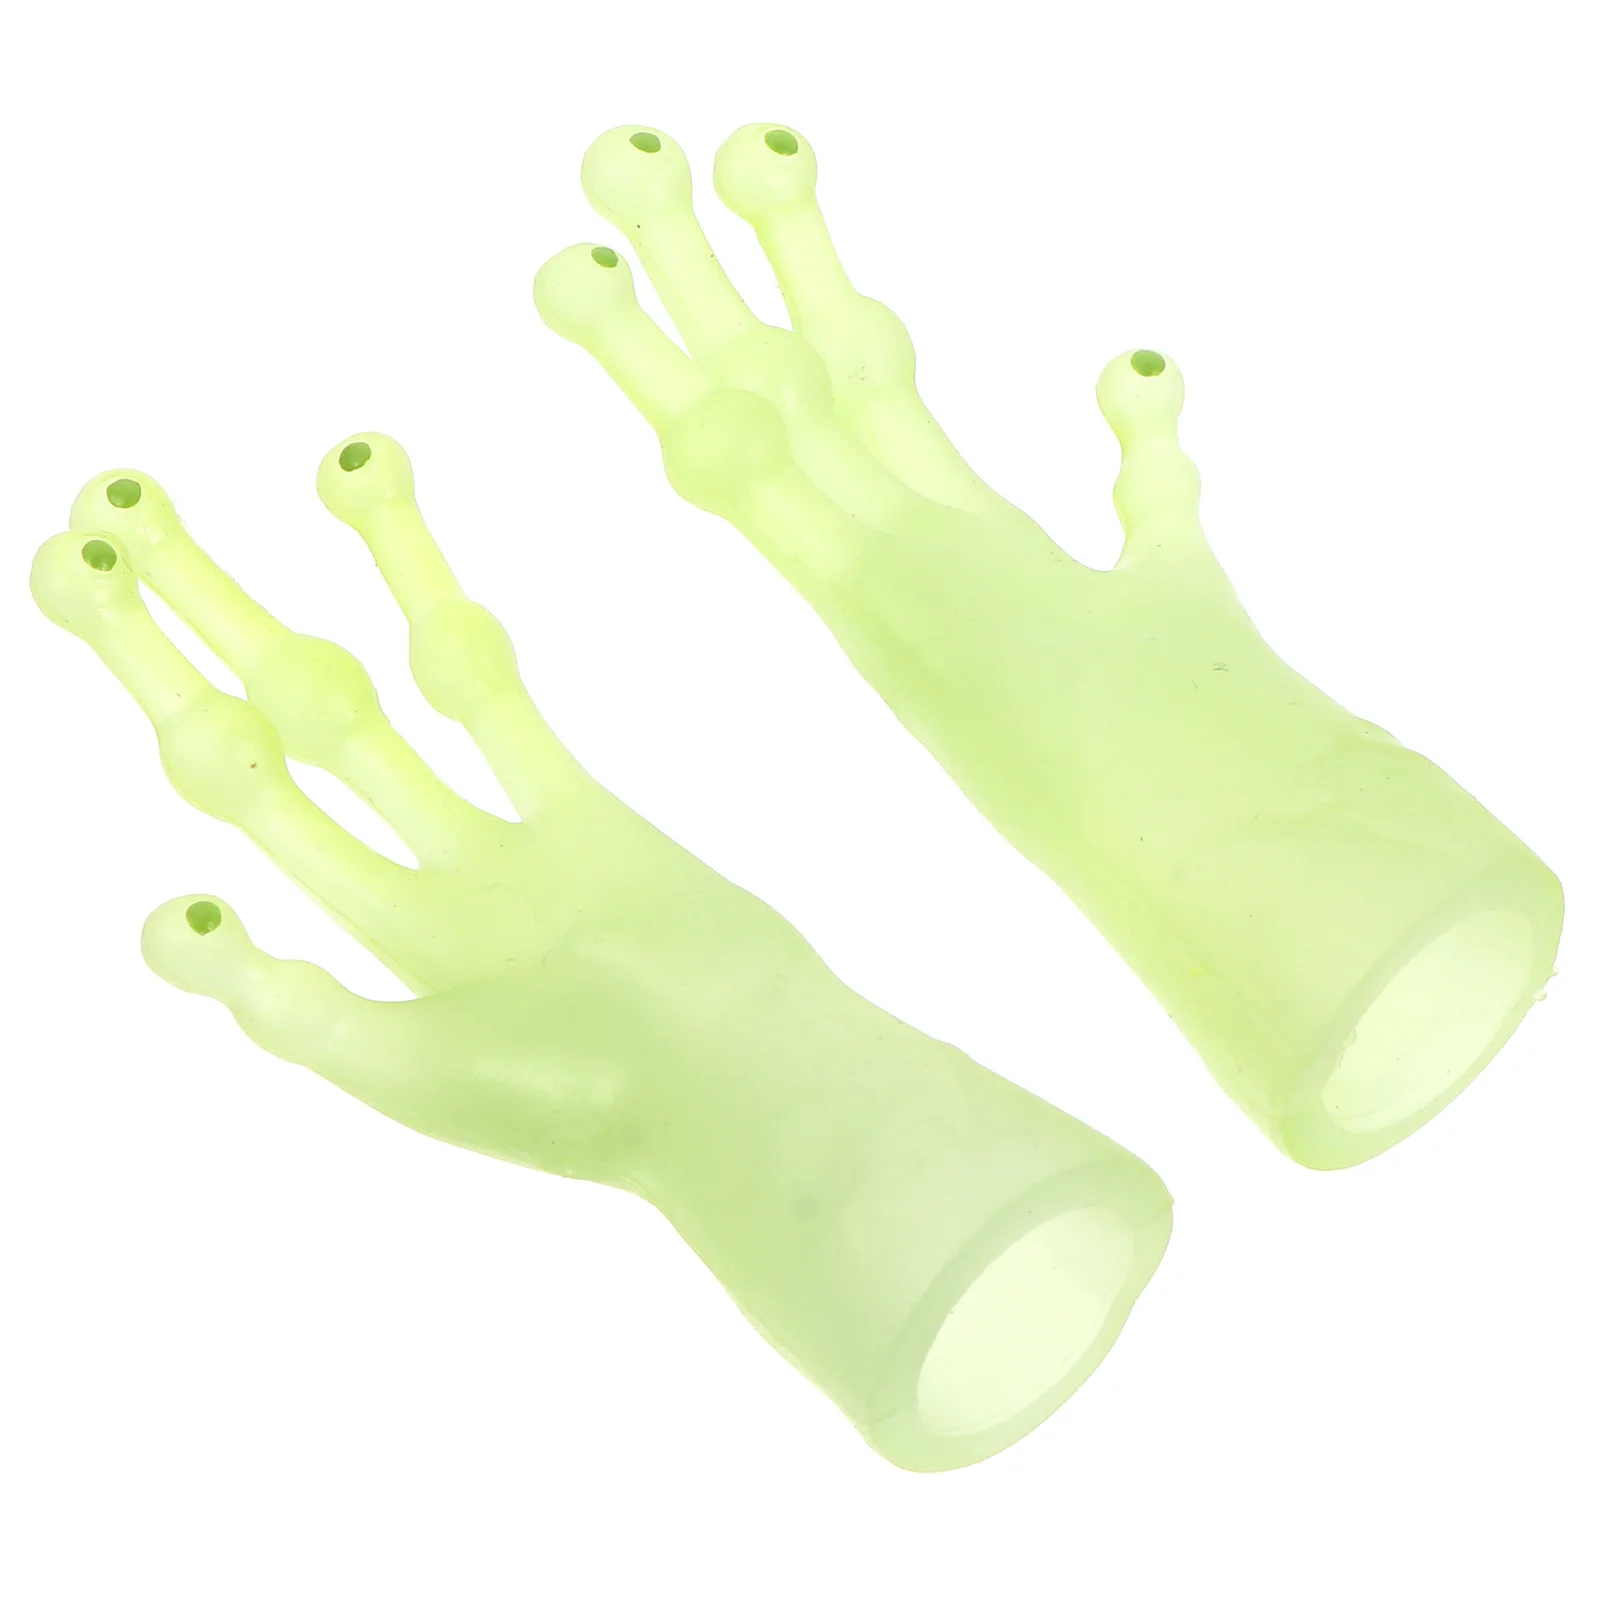 

2 Pcs Tricky Funny Finger Cots Kids Toy Childrens Toys Puppets Plaything Hand Dolls Realistic Party Favors